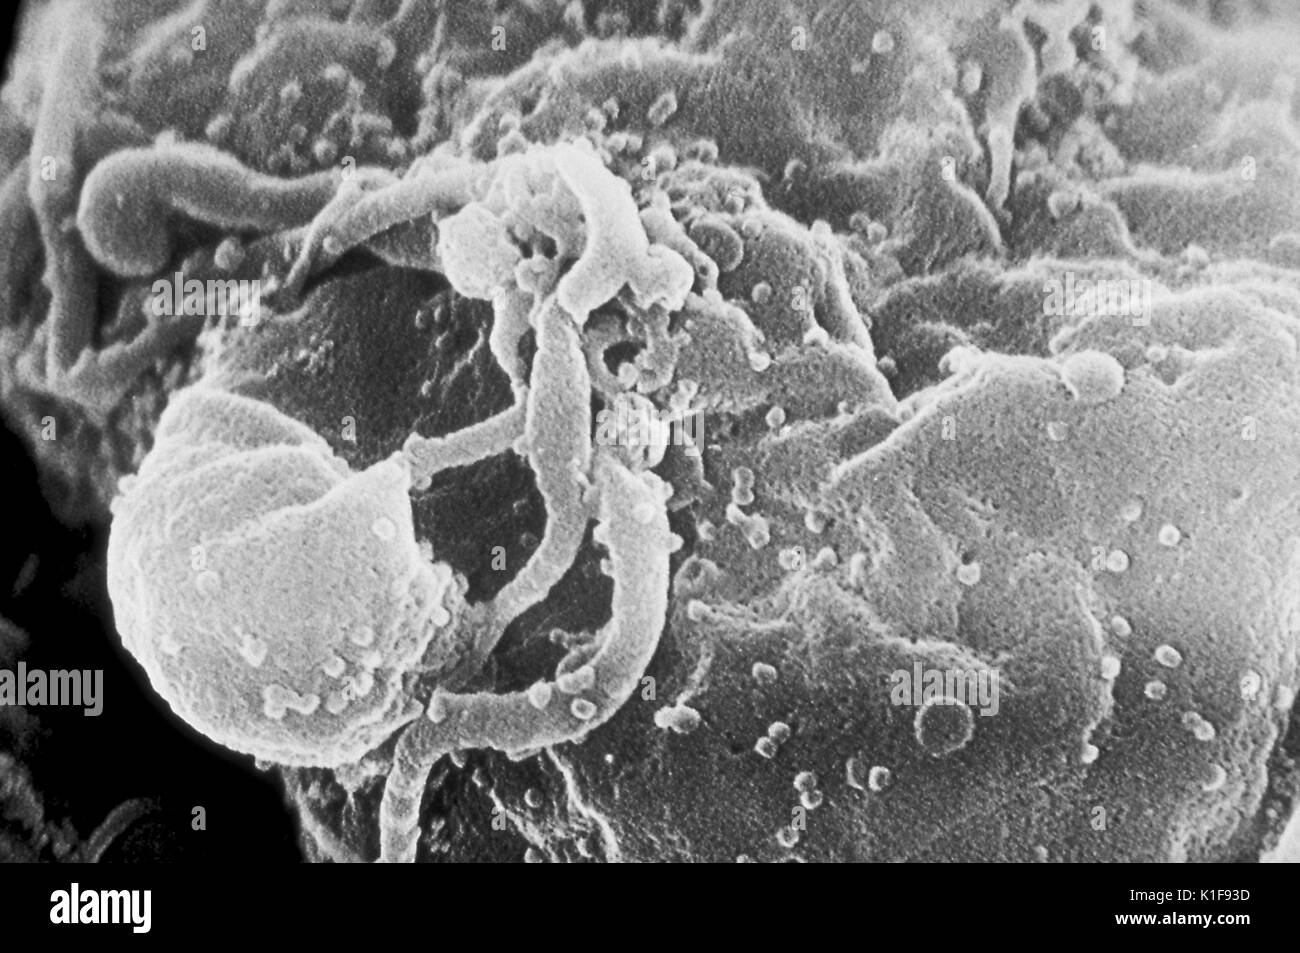 Scanning electron micrograph of HIV-1 virions budding from a cultured lymphocyte. See PHIL 10000 for a colorized view of this image, and PHIL 14270, for a black and white version, both viewed at a lower magnigication. Multiple round bumps on cell surface represent sites of assembly and budding of virions. Image courtesy CDC/C. Goldsmith, P. Feorino, E. L. Palmer, W. R. McManus. 1974. Stock Photo